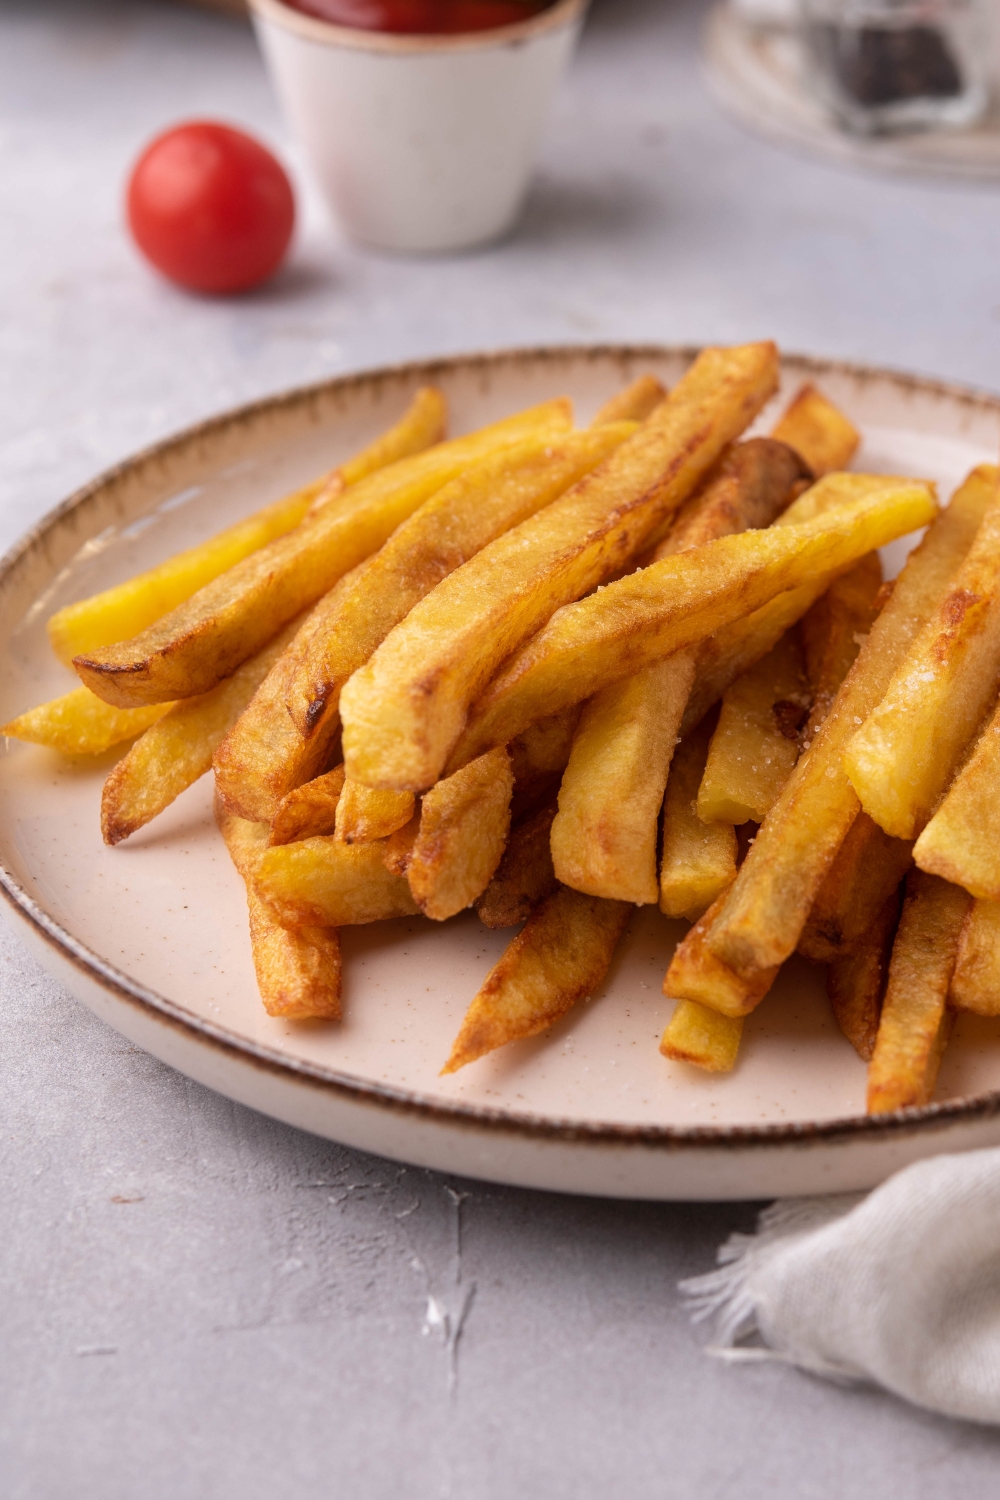 A plate with french fries.